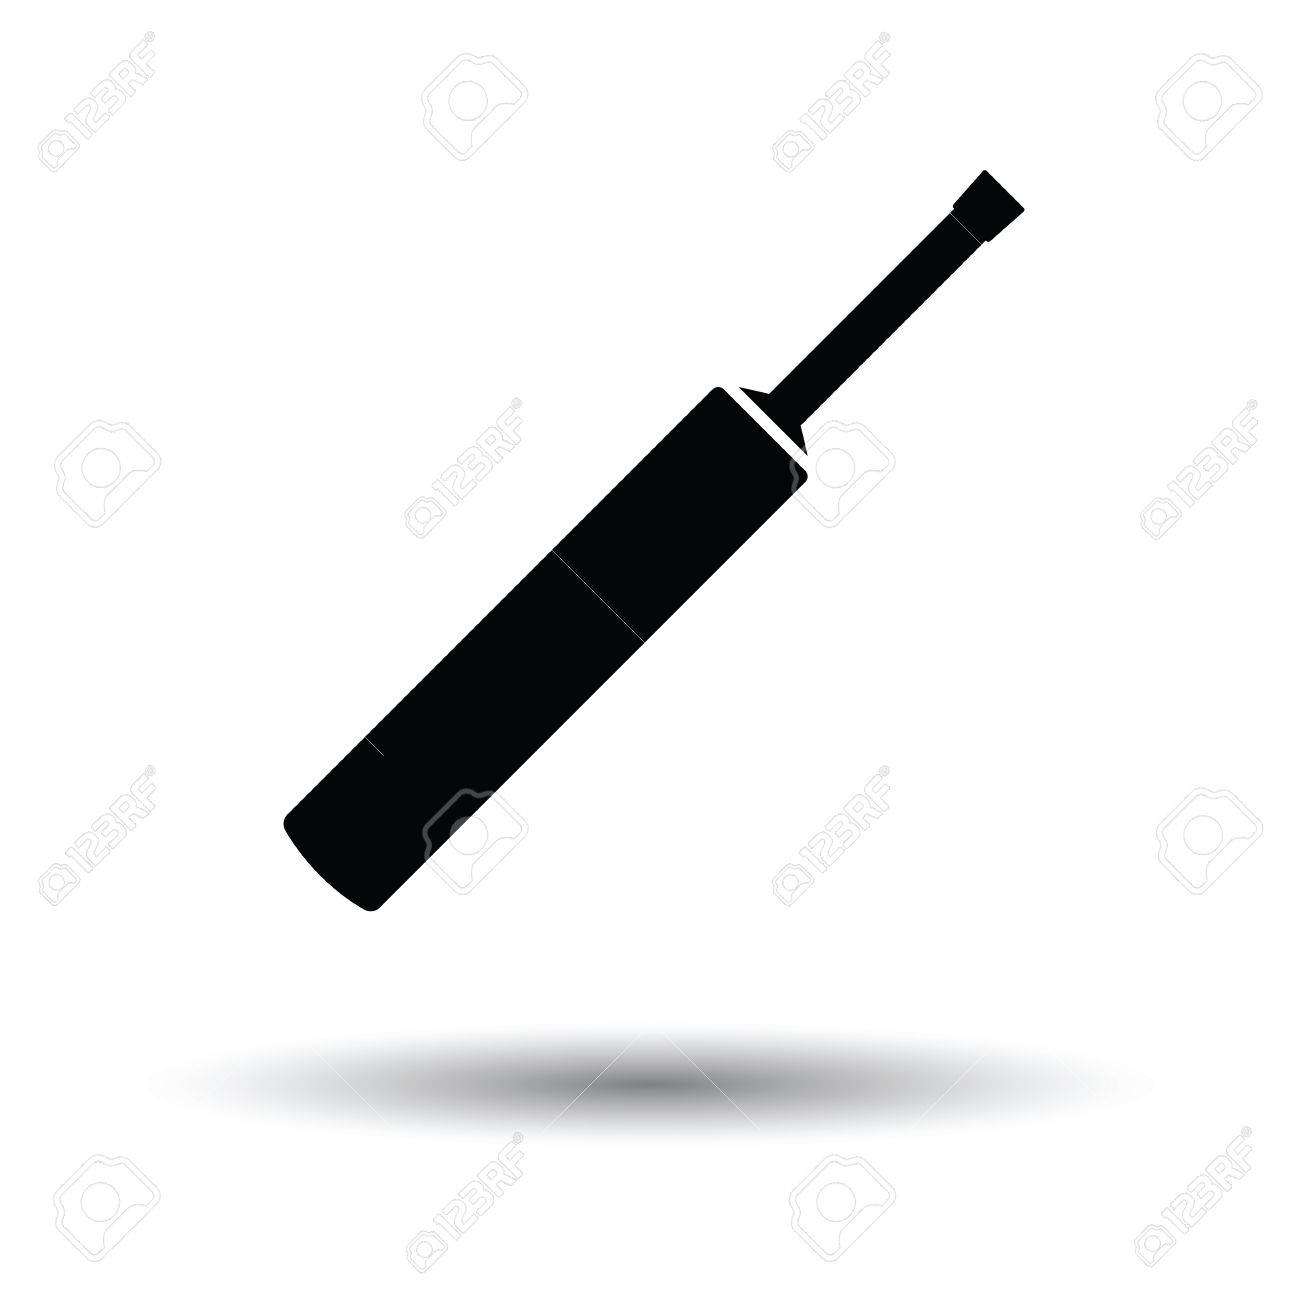 Cricket bat icon. White background with shadow design. Vector...